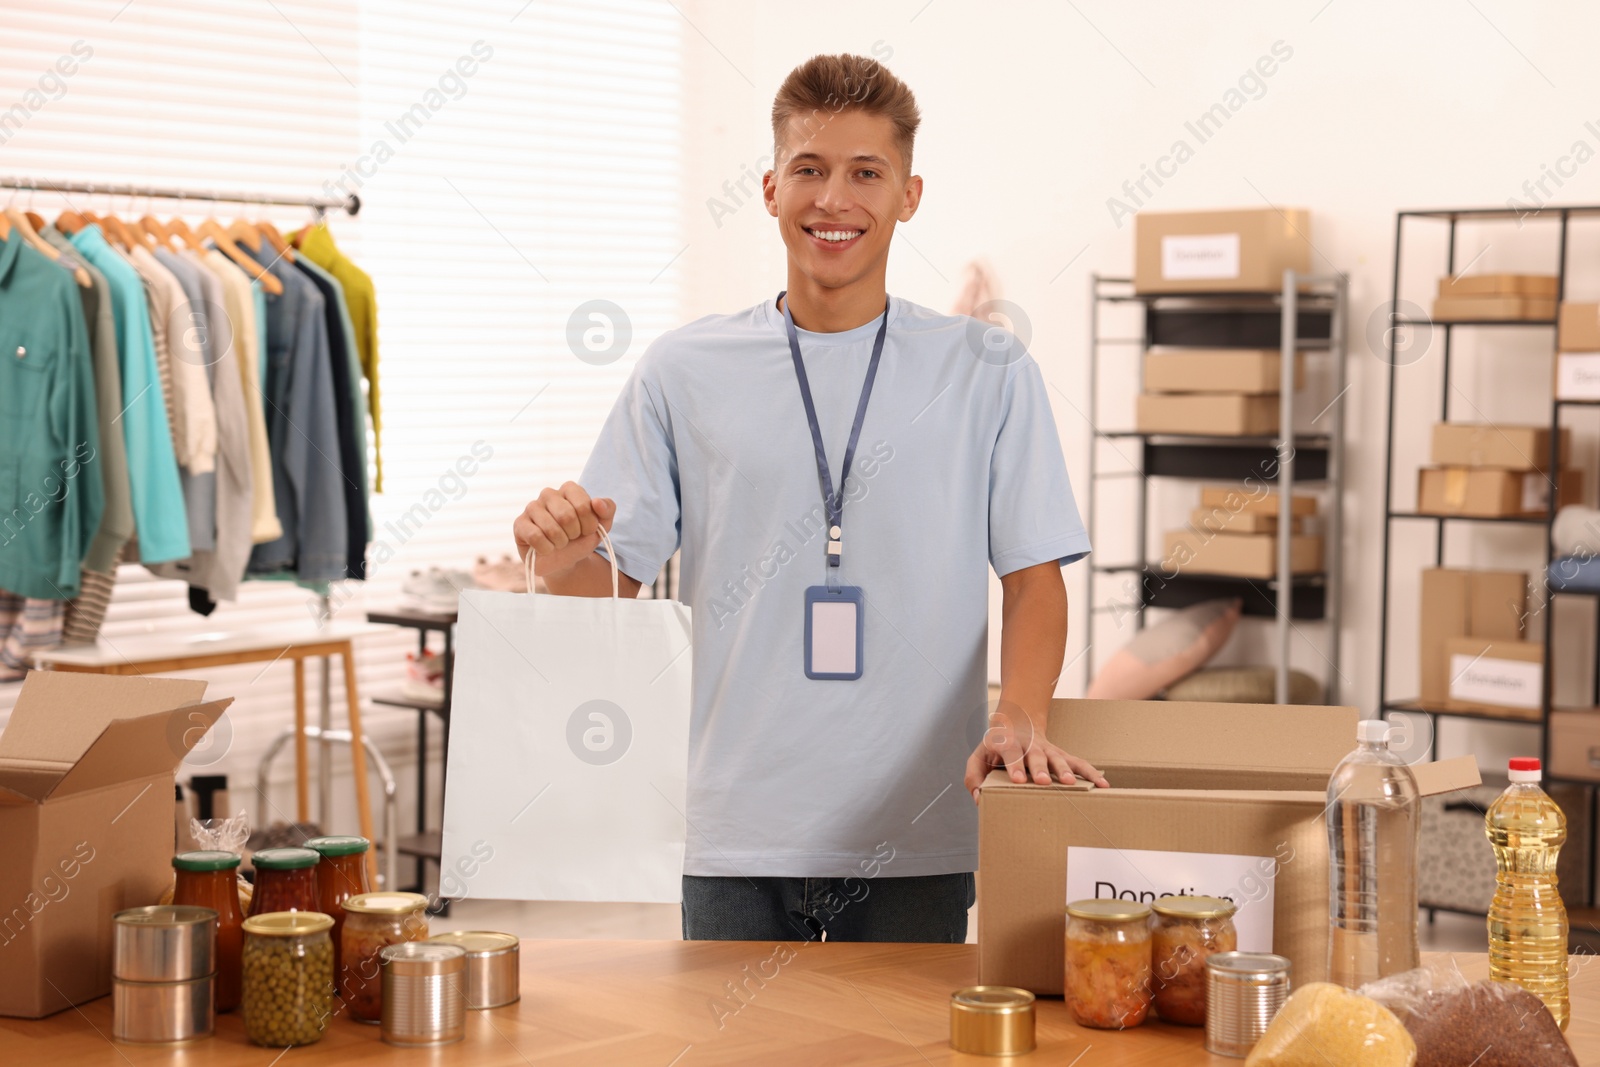 Photo of Volunteer with paper bag and food products at table in warehouse